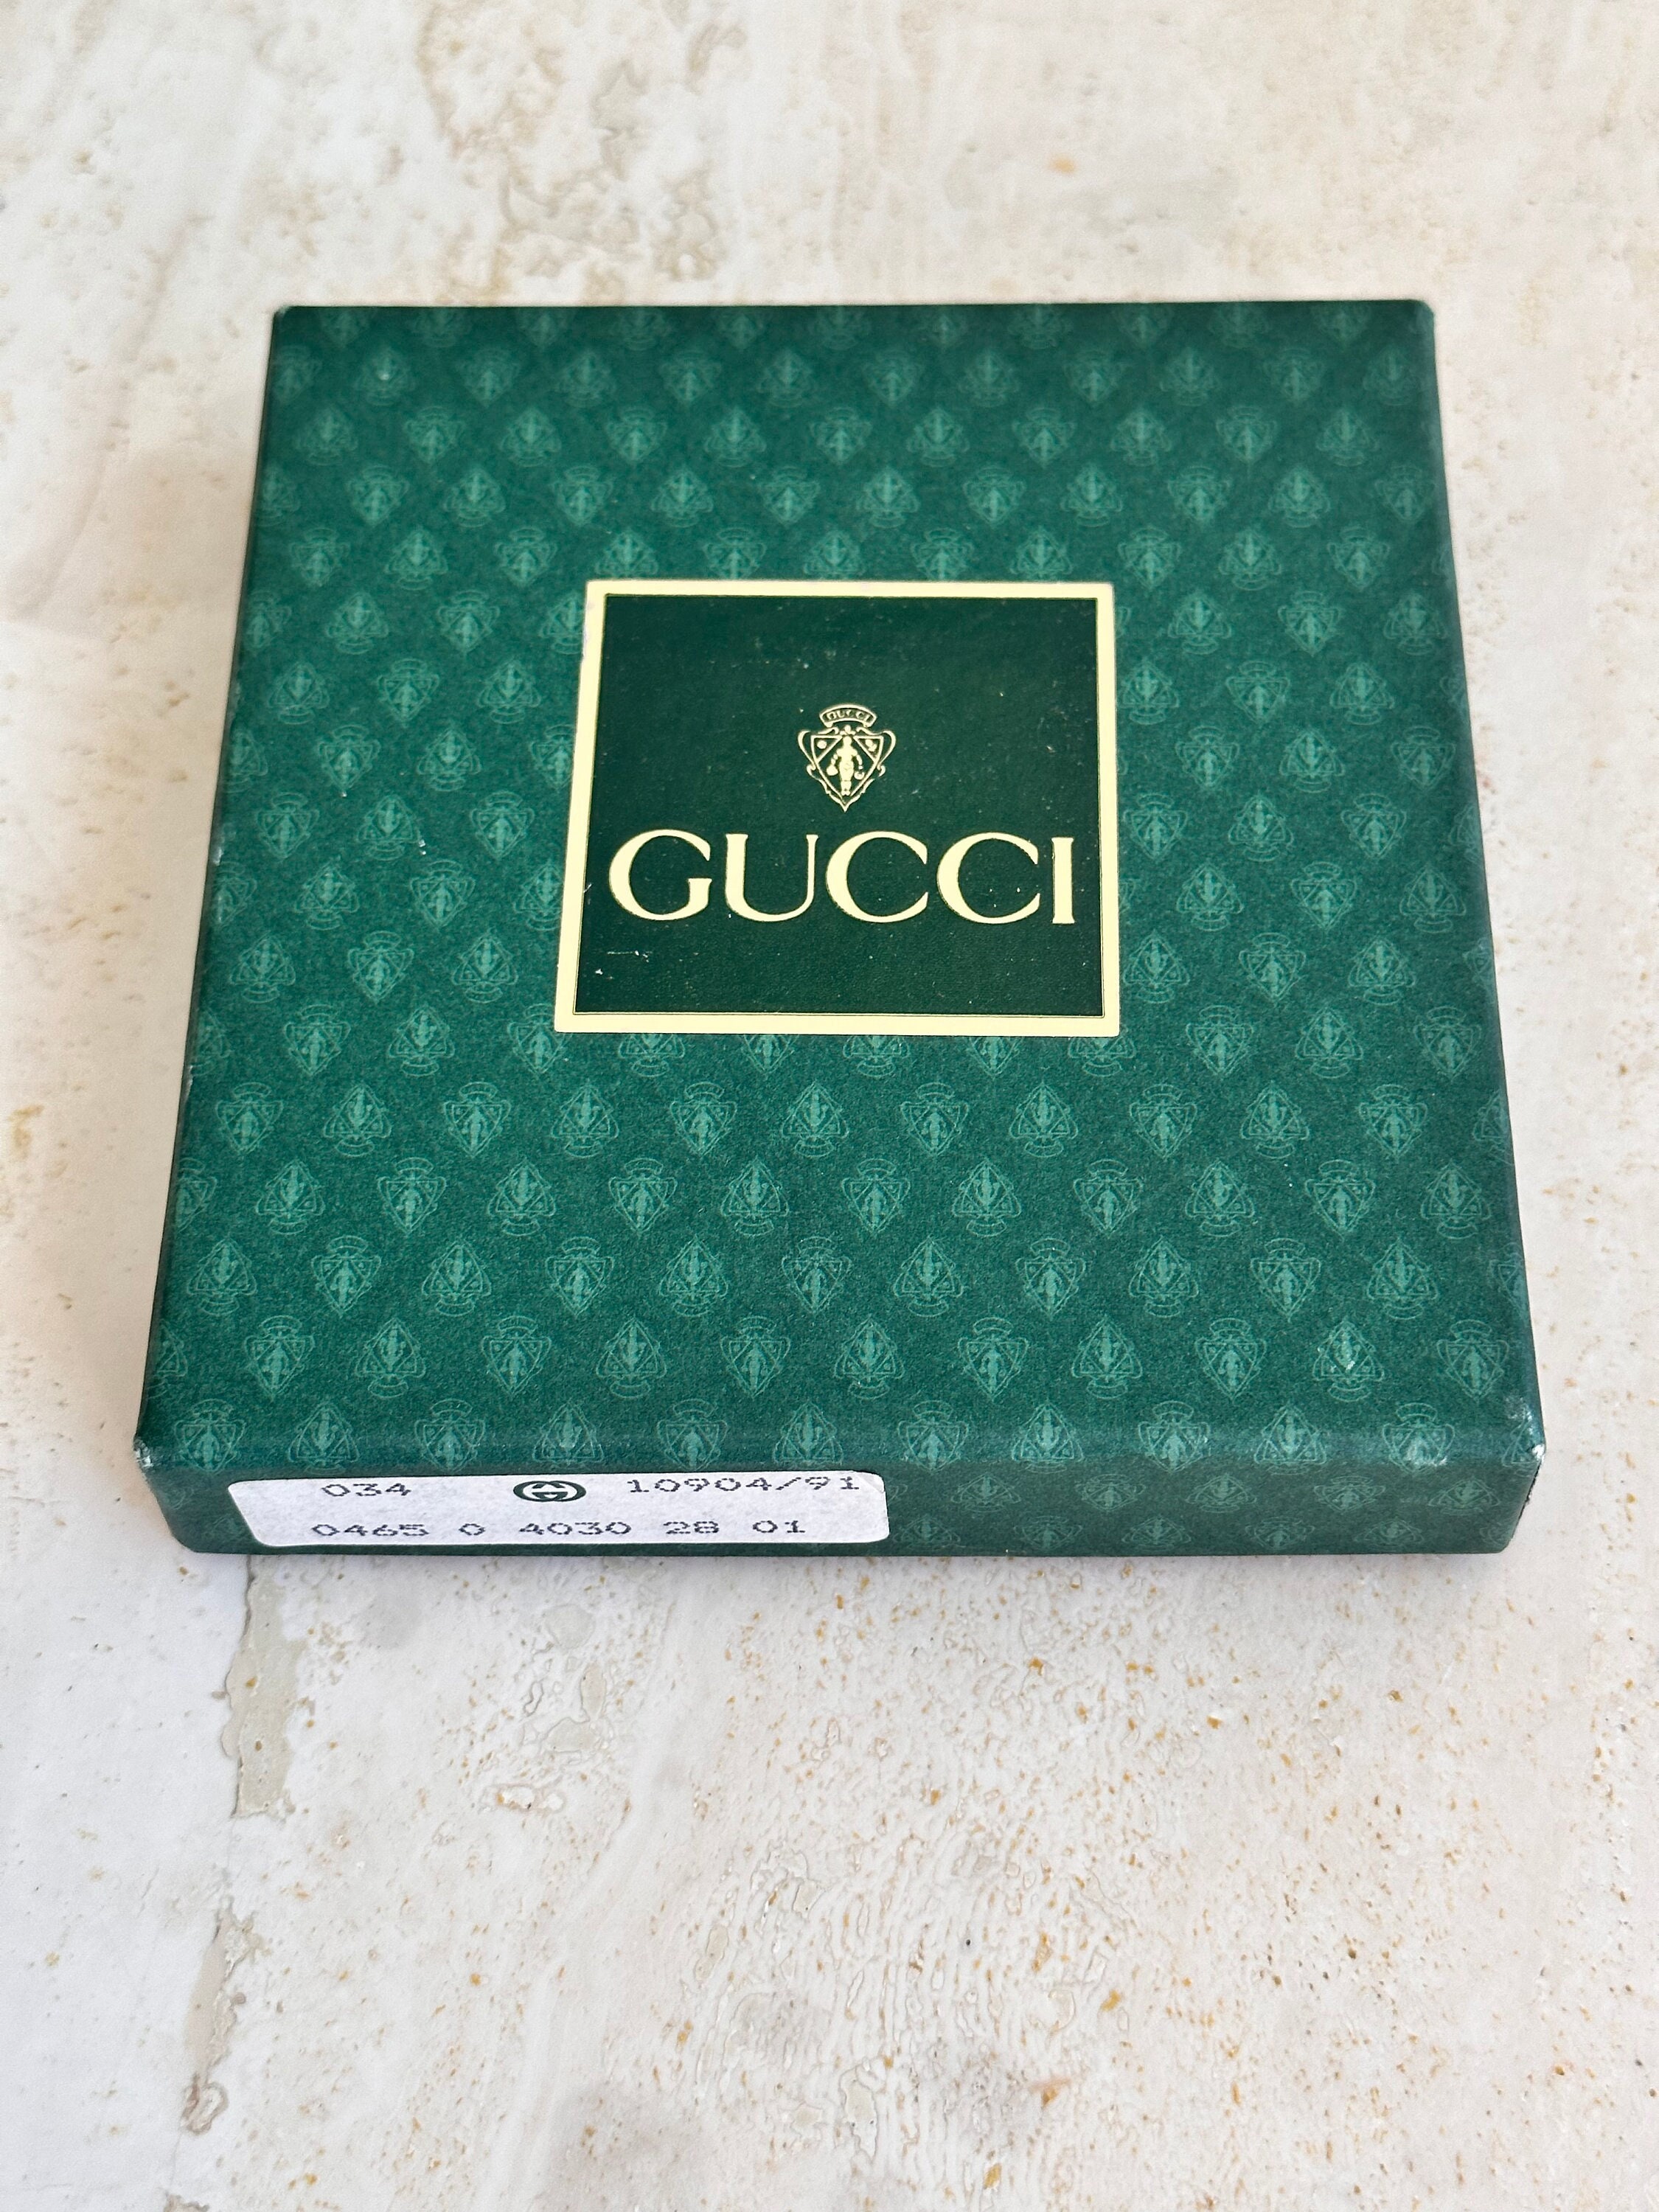 Gucci VINTAGE Silver/Brass Plated c1970s Cigar Box VERY RARE